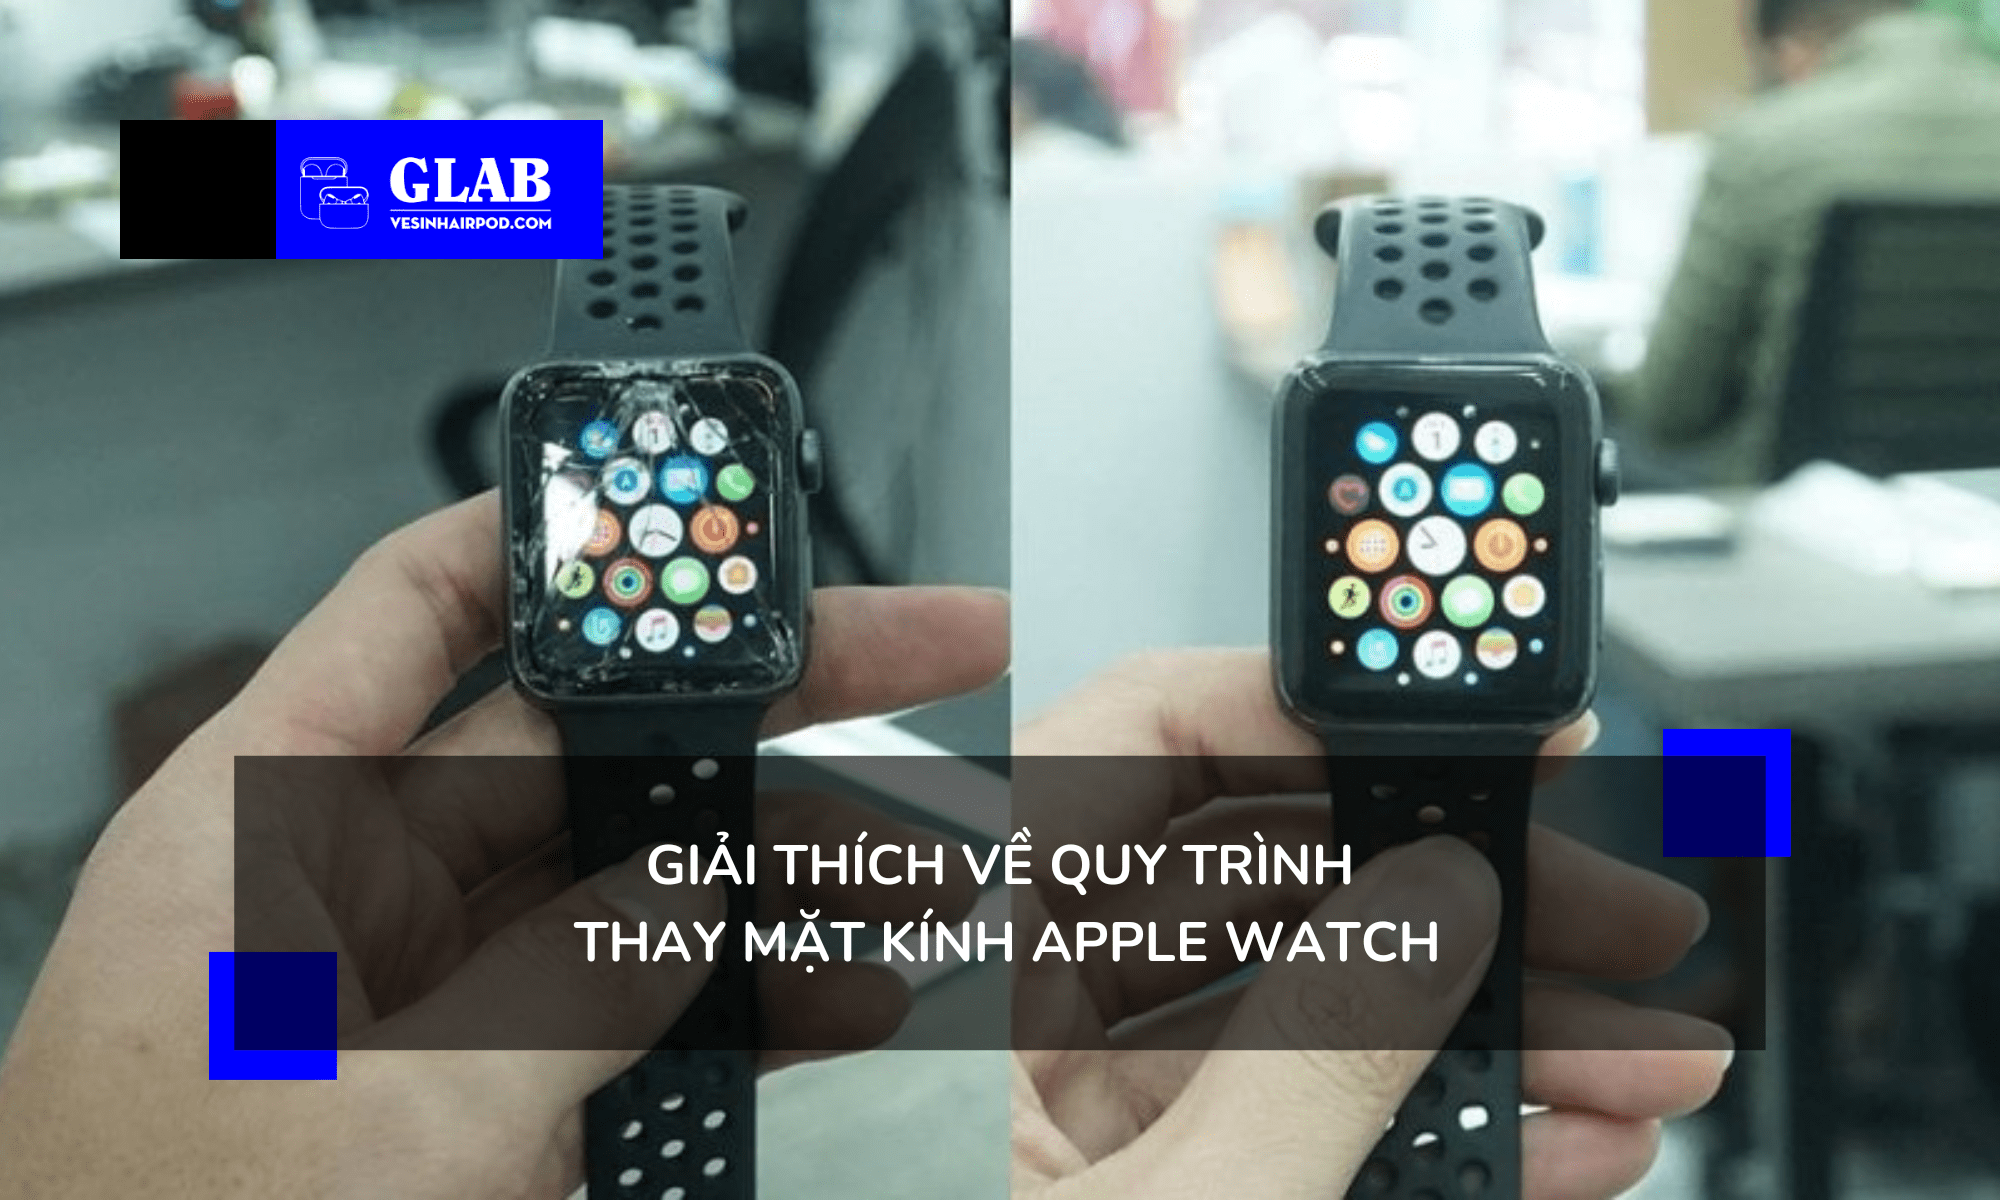 quy-trinh-thay-mat-kinh-apple-watch